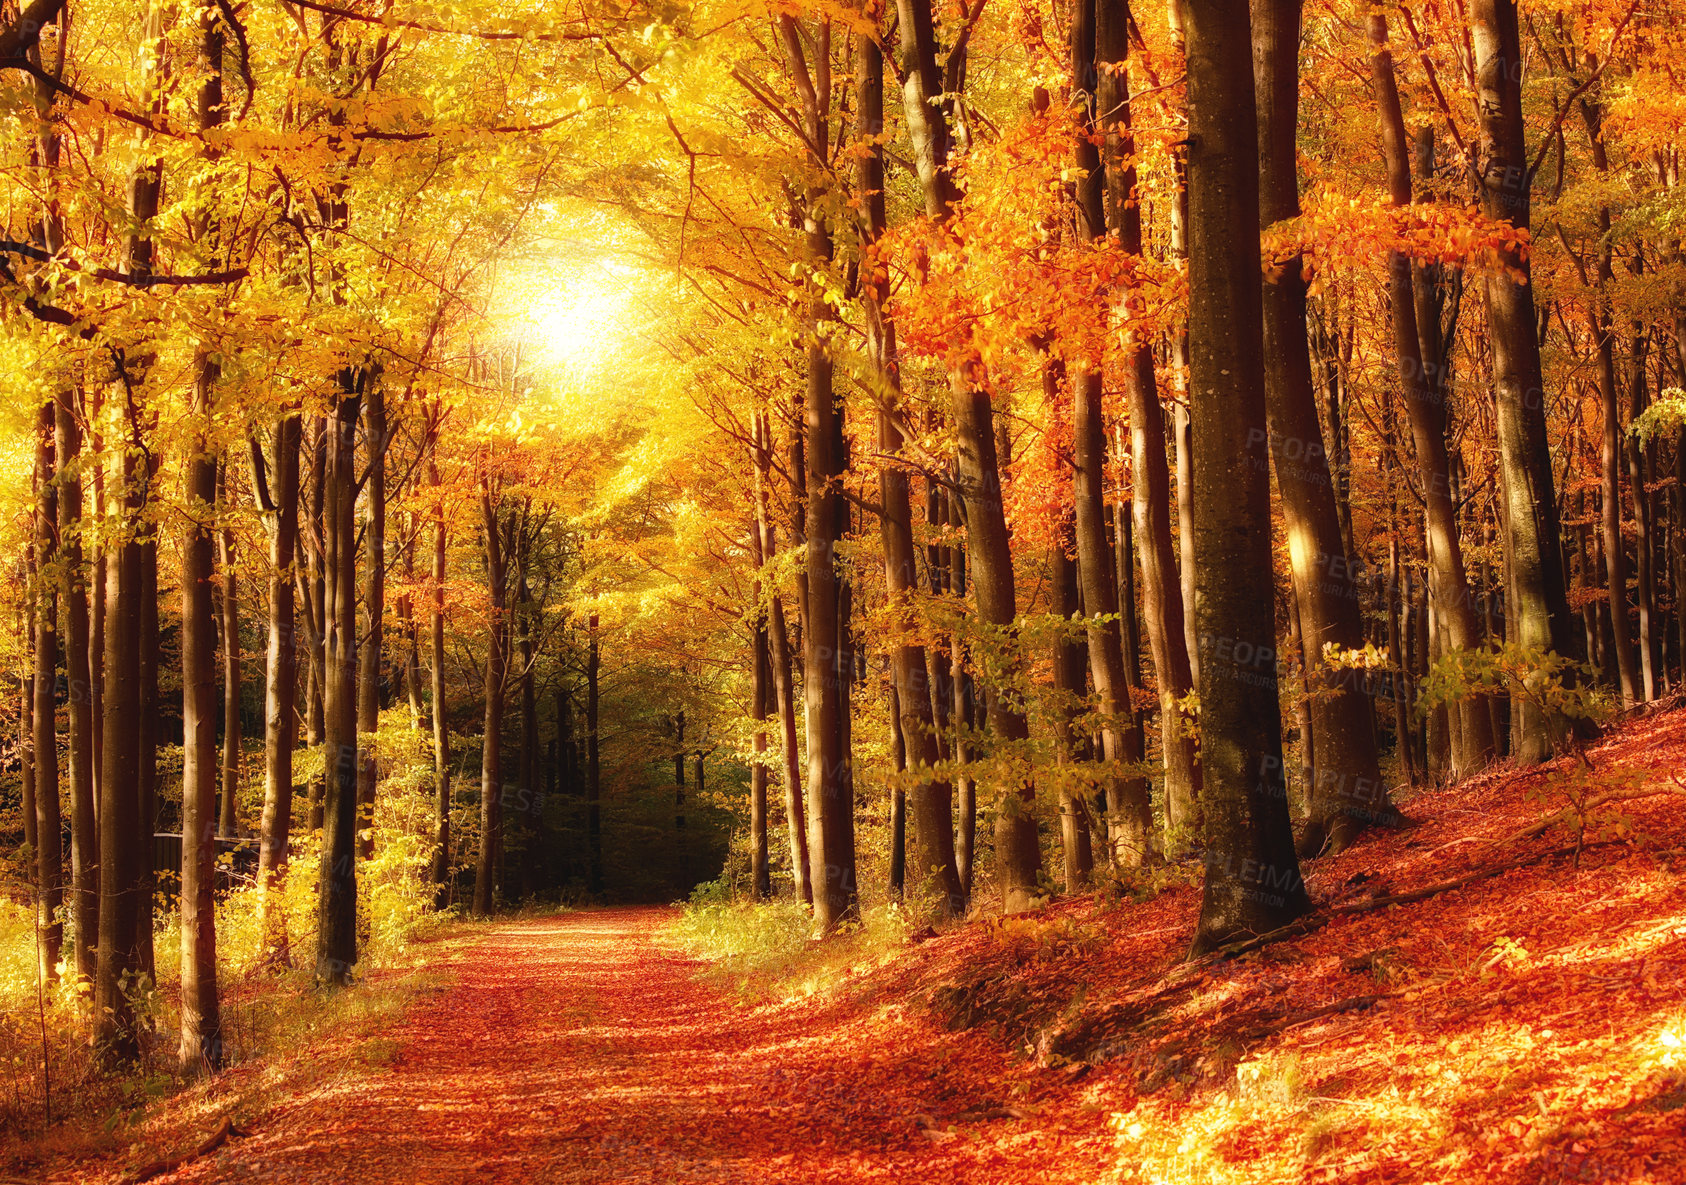 Buy stock photo The forest in autumn - colorful